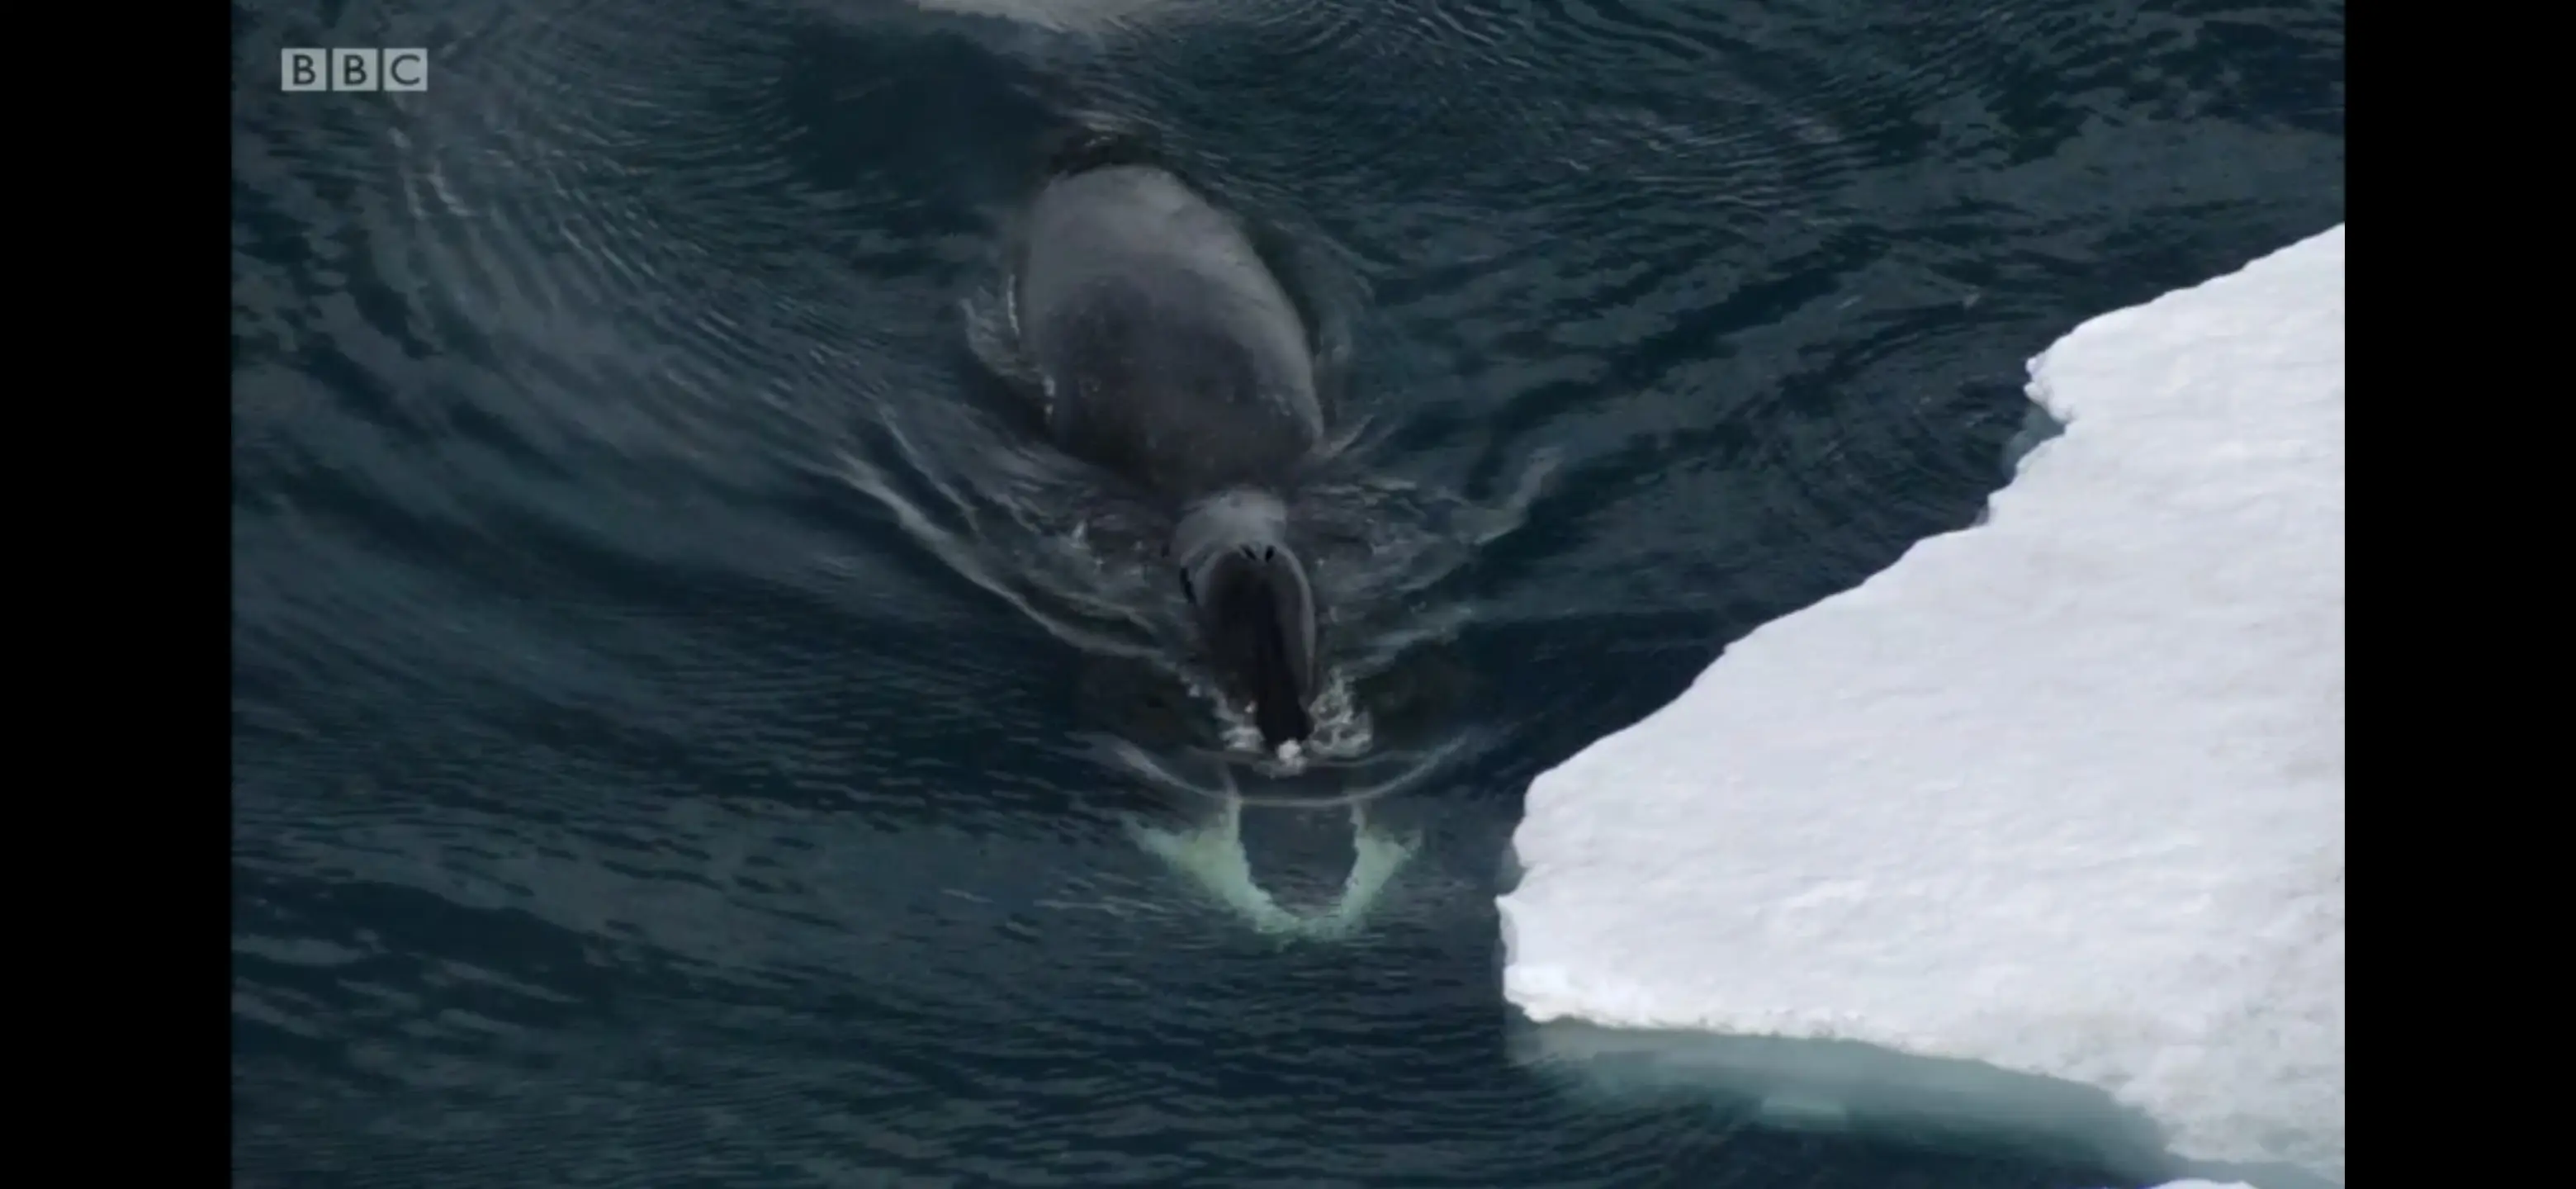 Bowhead whale (Balaena mysticetus) as shown in Frozen Planet - On Thin Ice